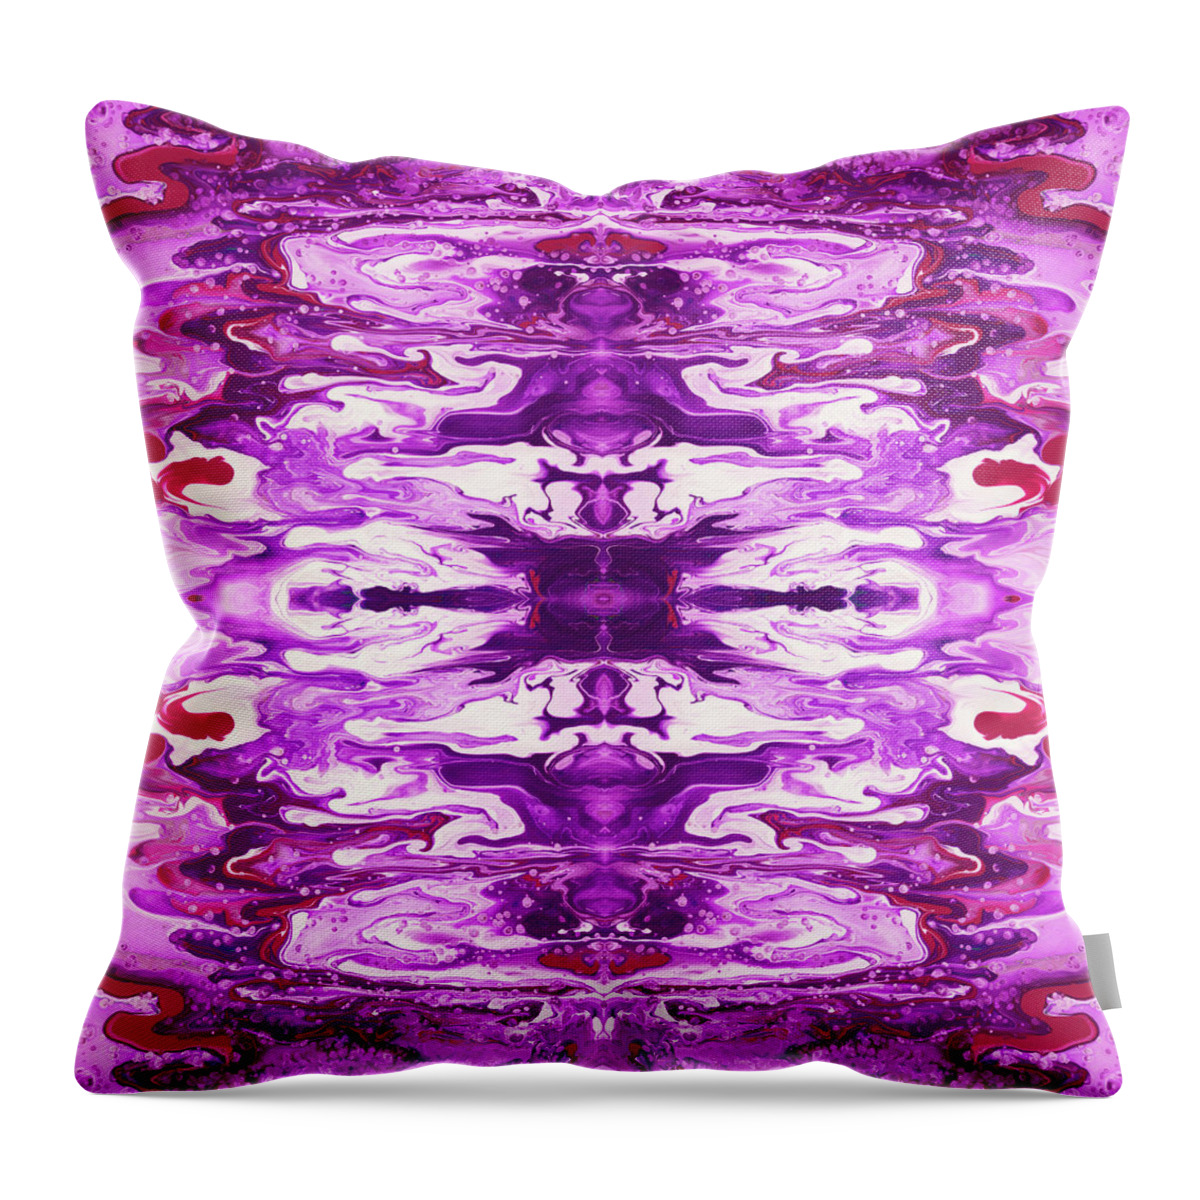 Abstract Throw Pillow featuring the painting Violet Groove- Art by Linda Woods by Linda Woods